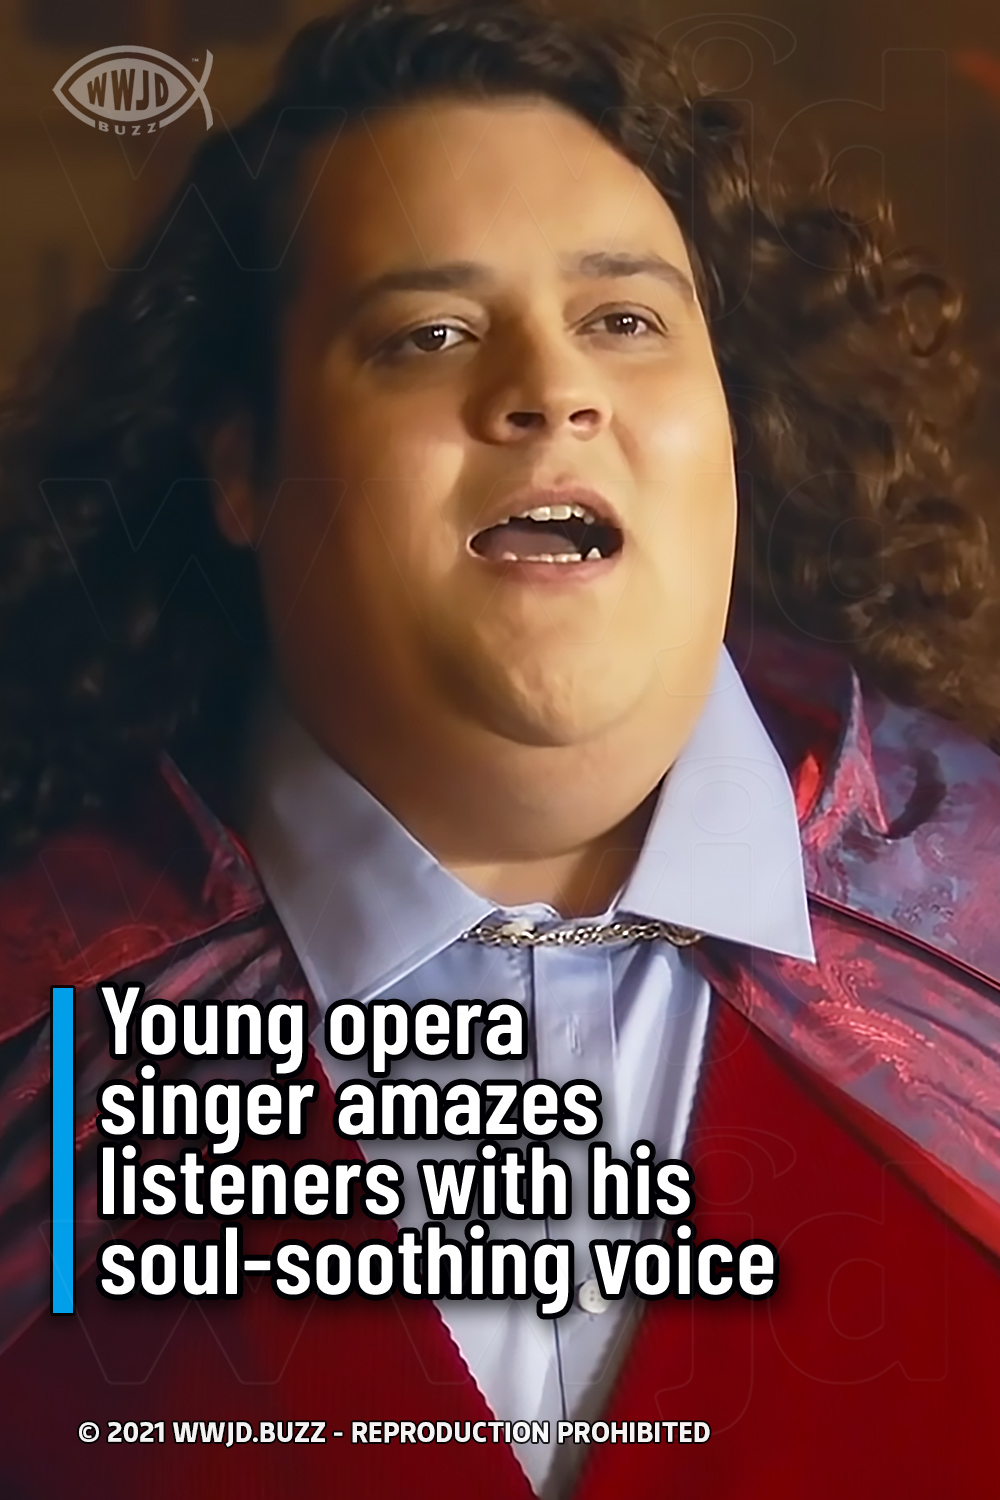 Young opera singer amazes listeners with his soul-soothing voice